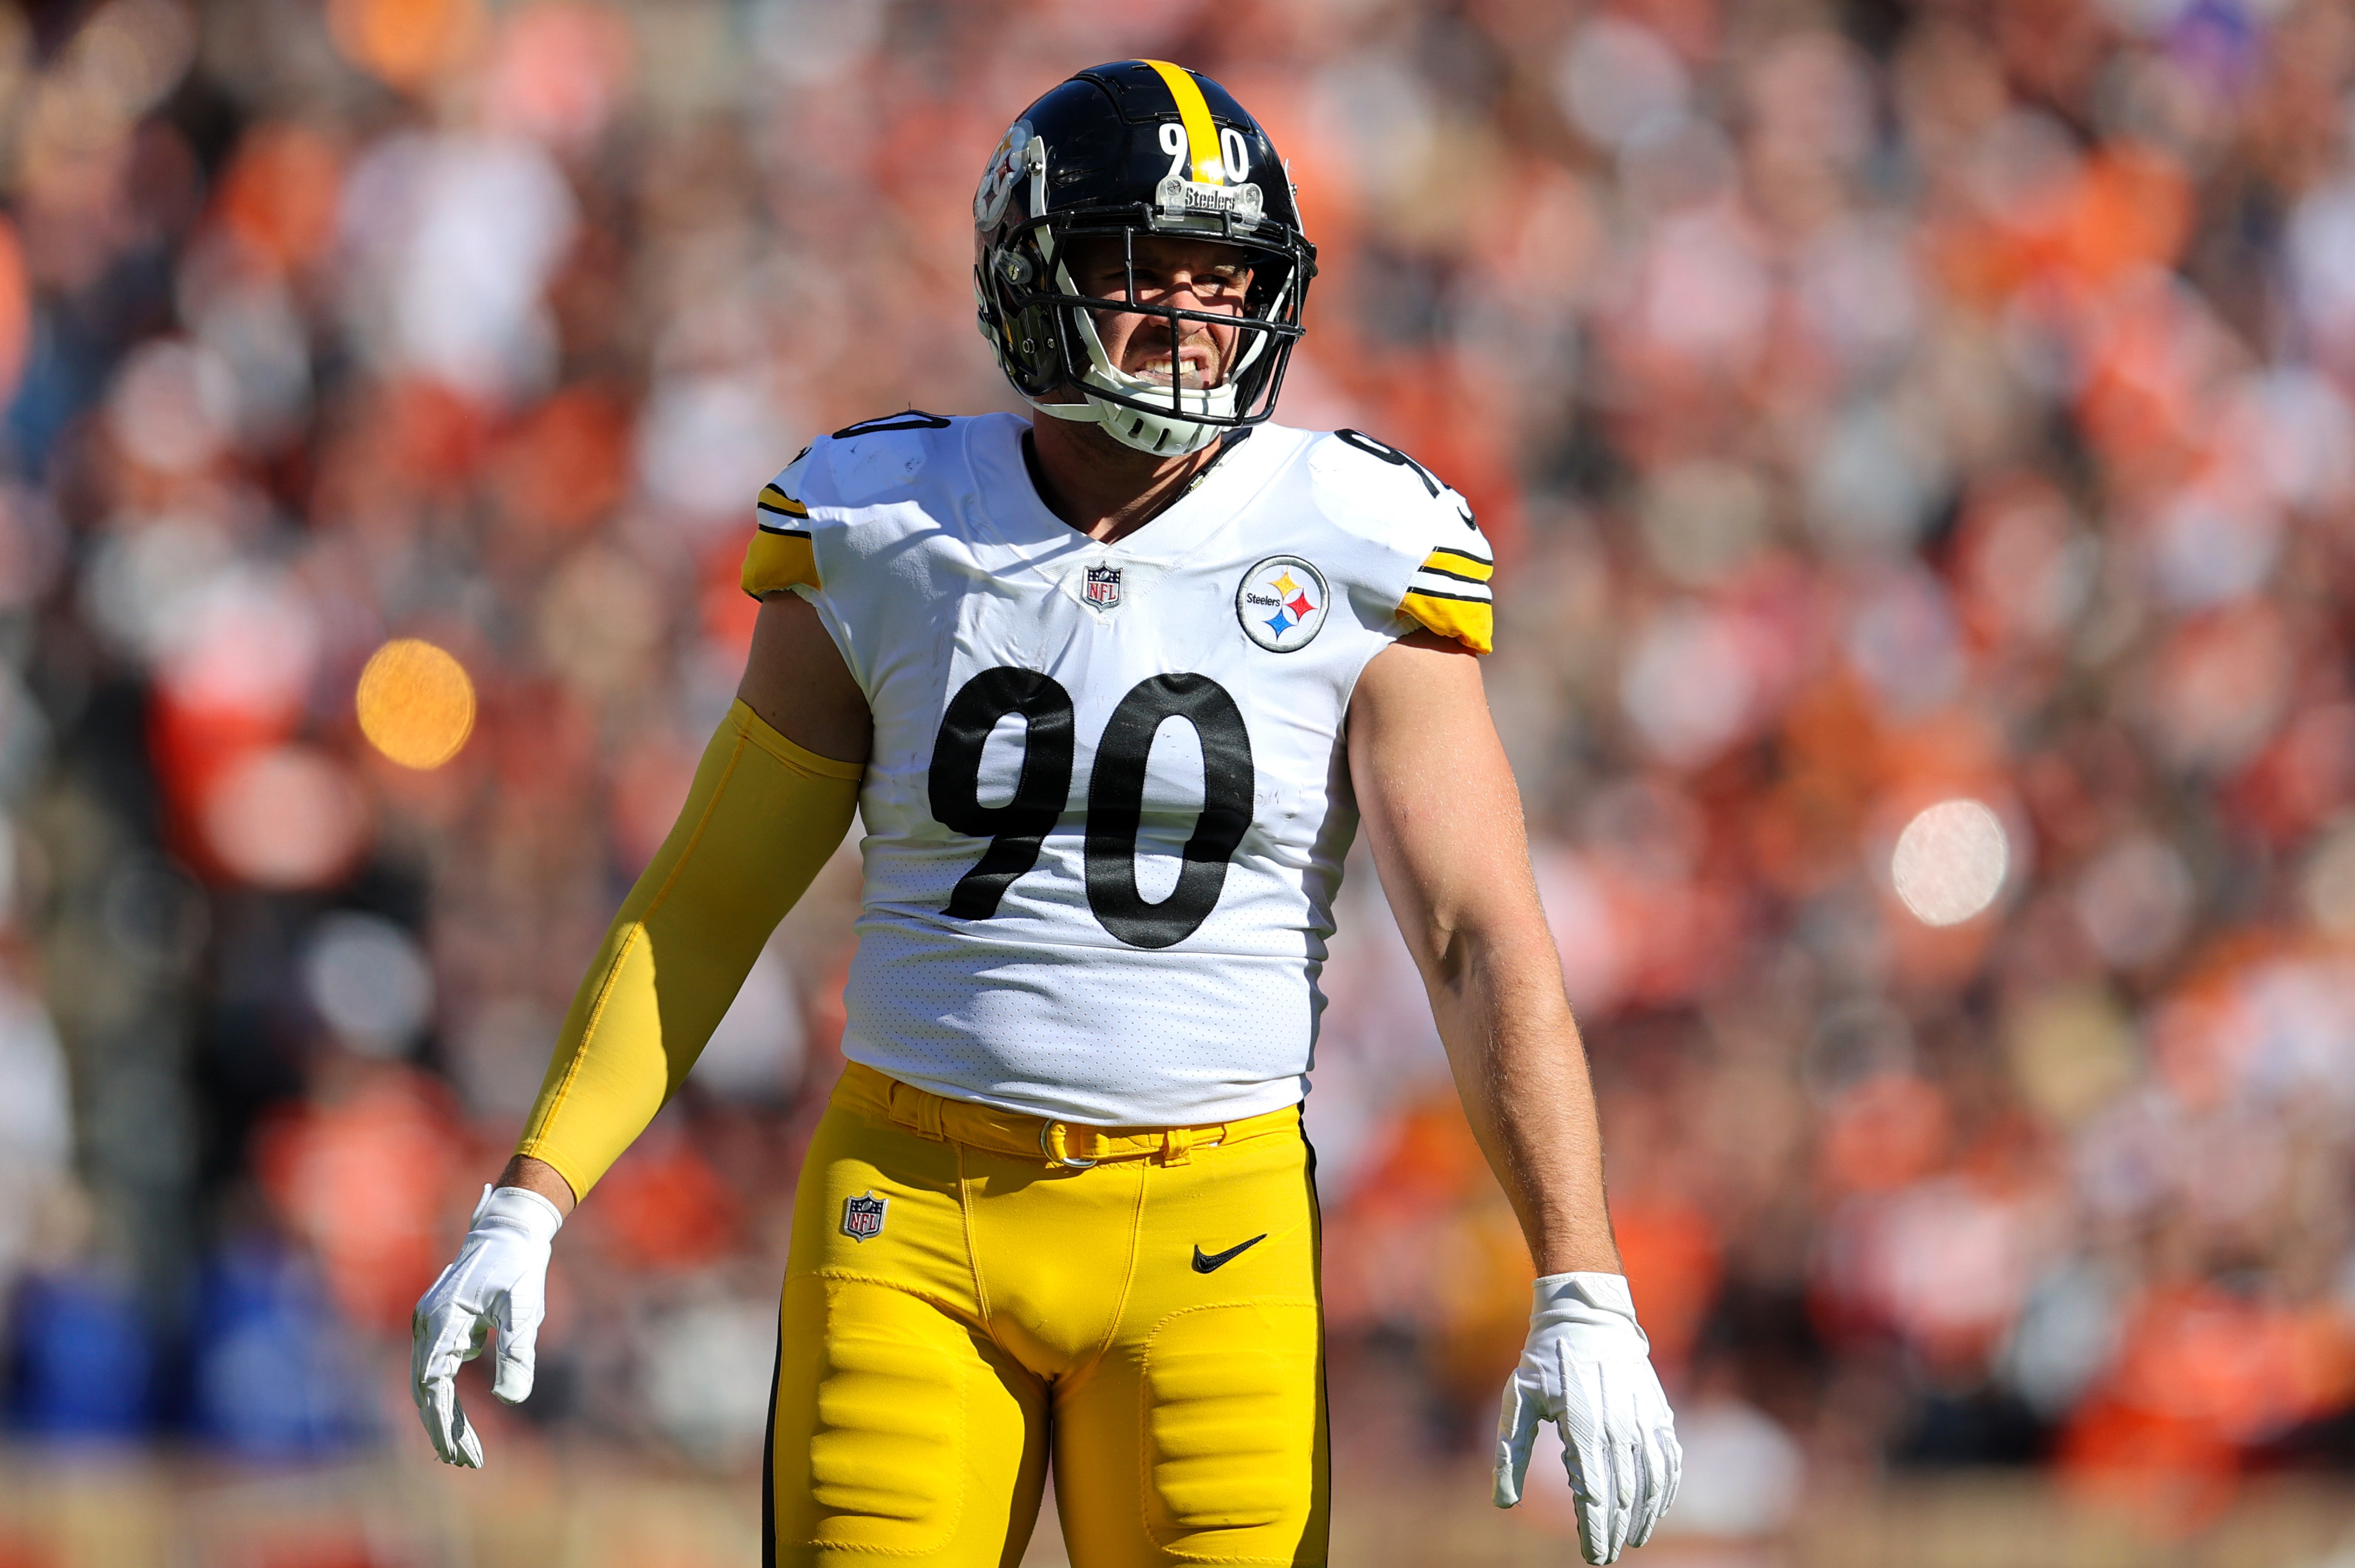 Report: Steelers' Watt could be ready for Week 3 after groin injury